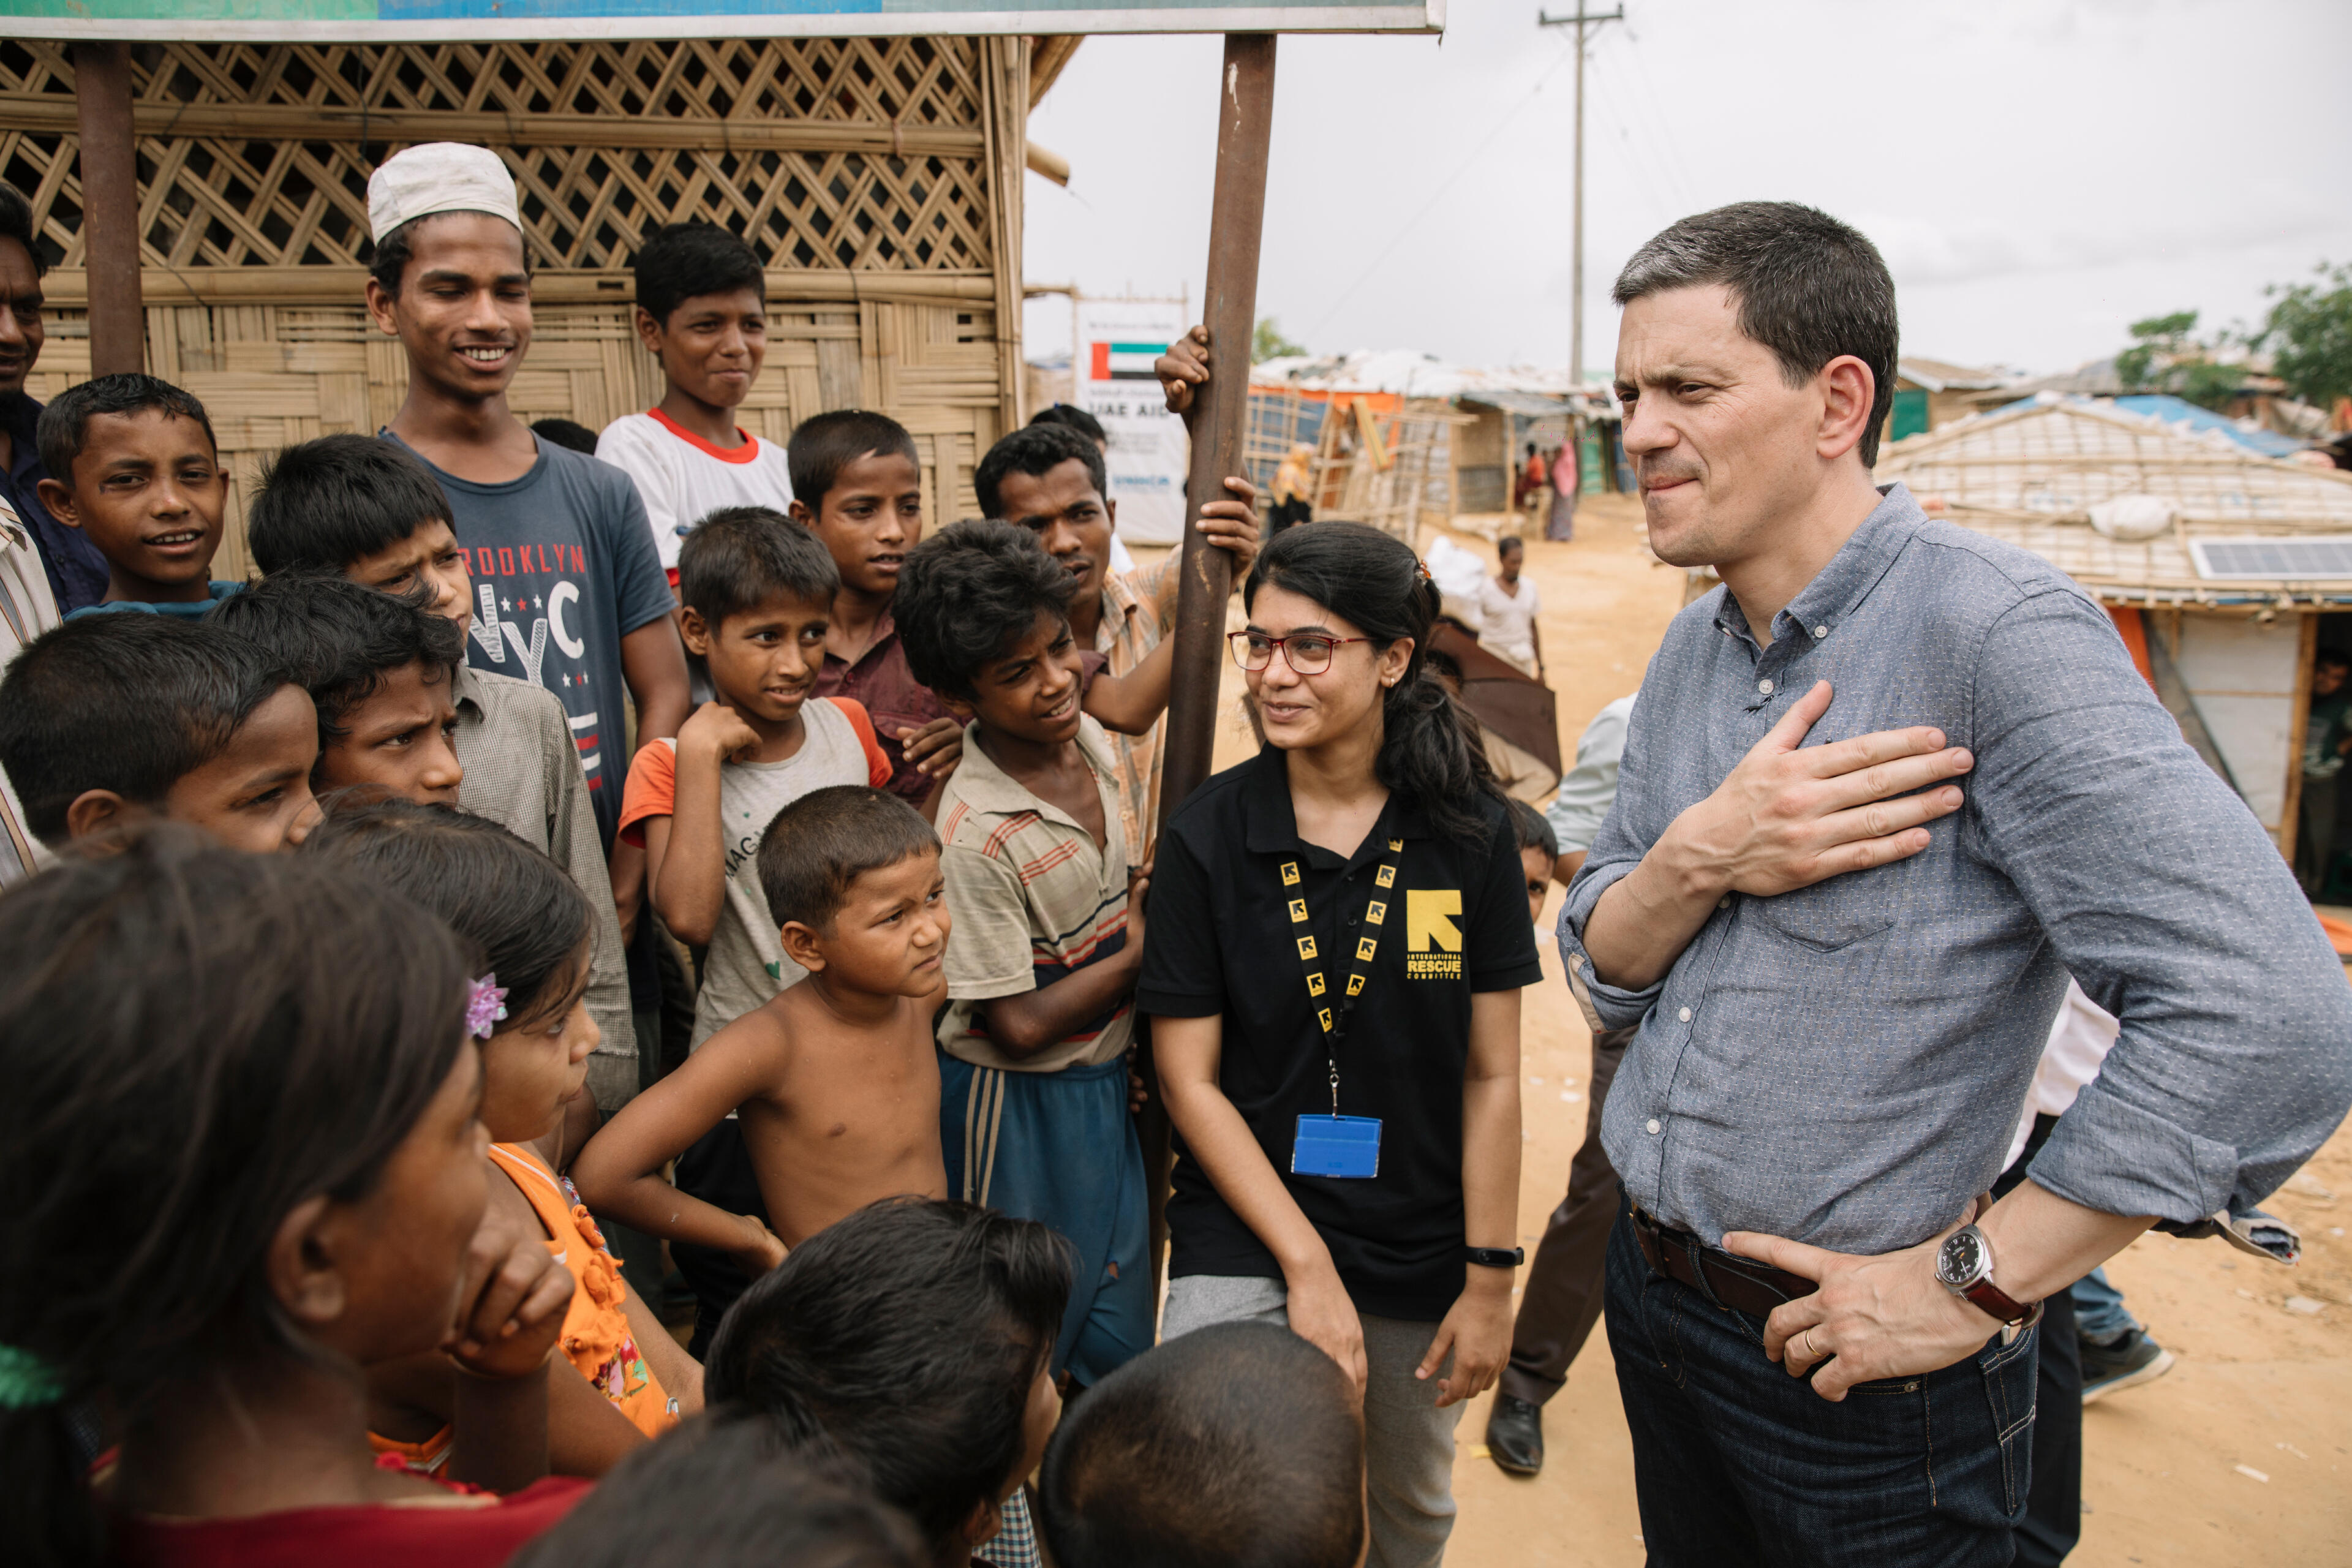 David Miliband places his hand on his heart as he stands speaking with Rohingya refugees in a camp in Bangladesh.